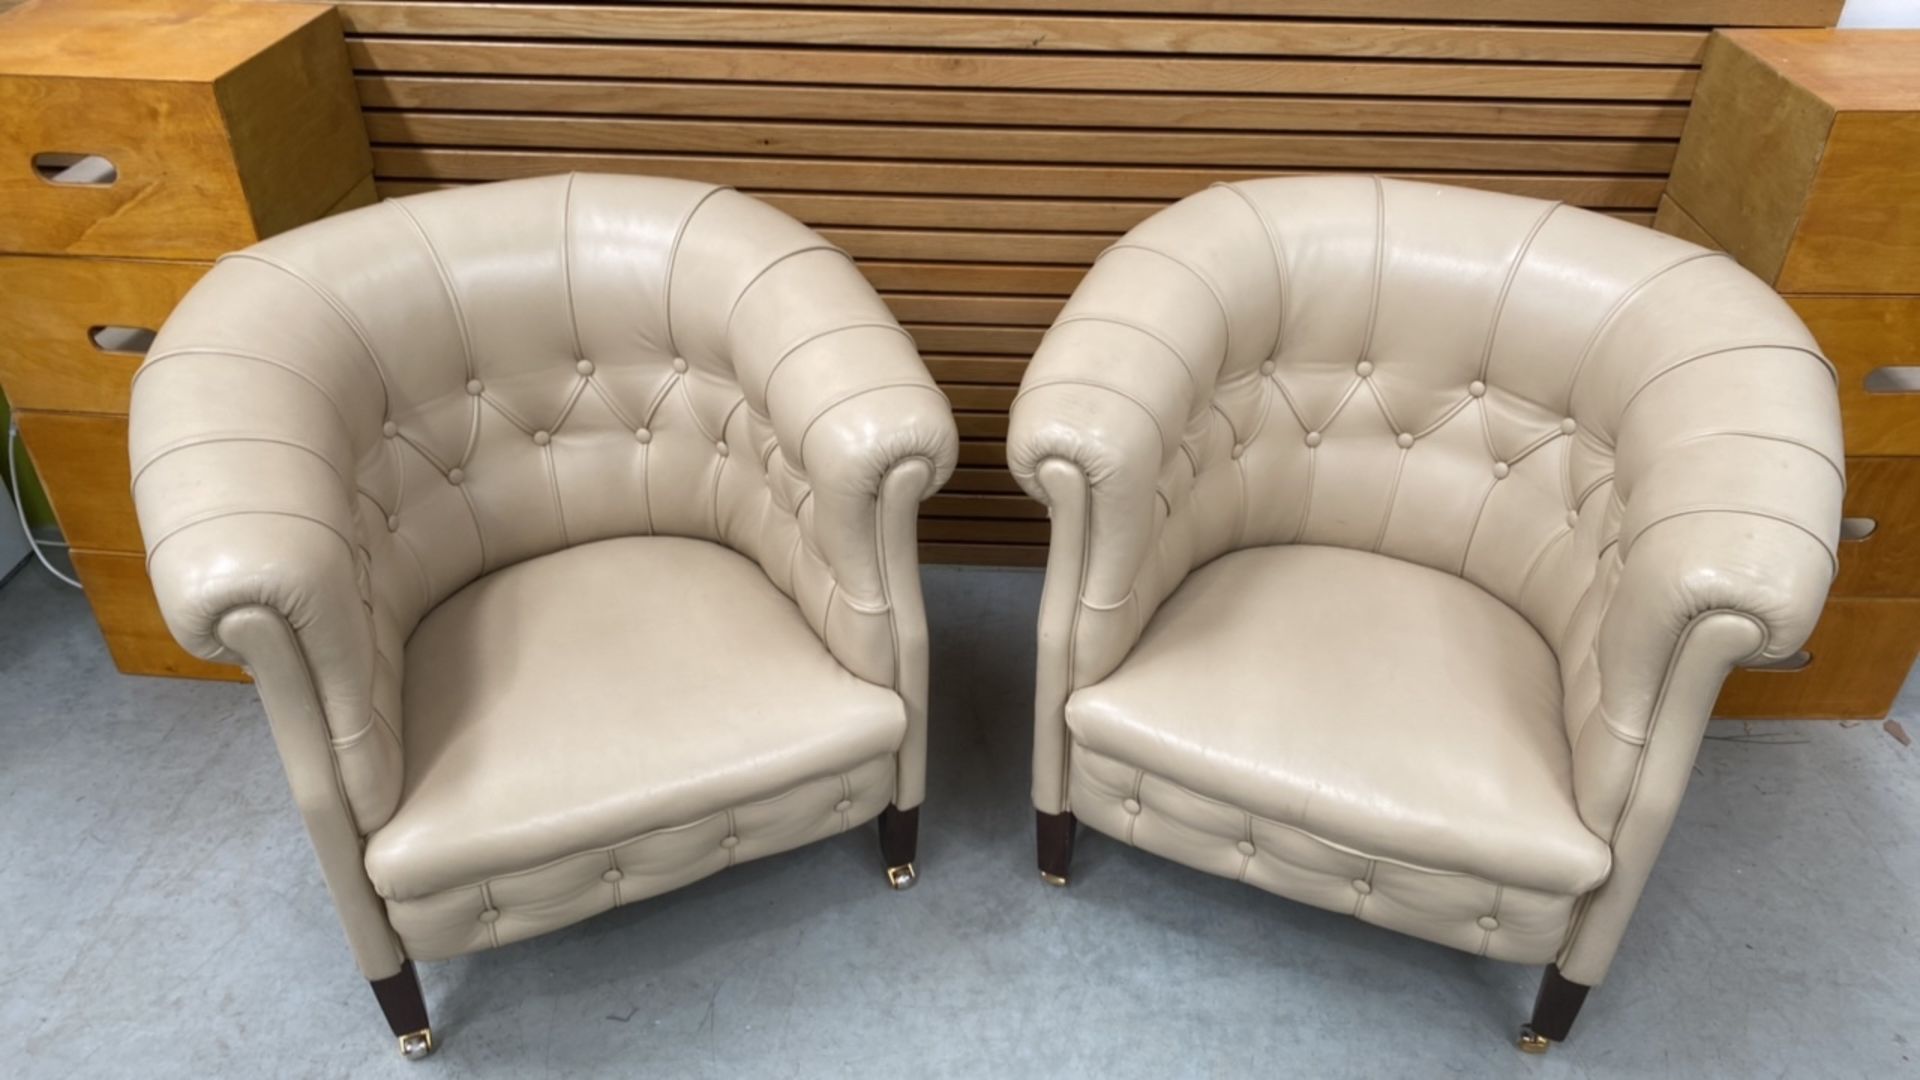 Faux-Poltrona Frau Buttoned Tub Accent Armchair X2 - Image 2 of 4